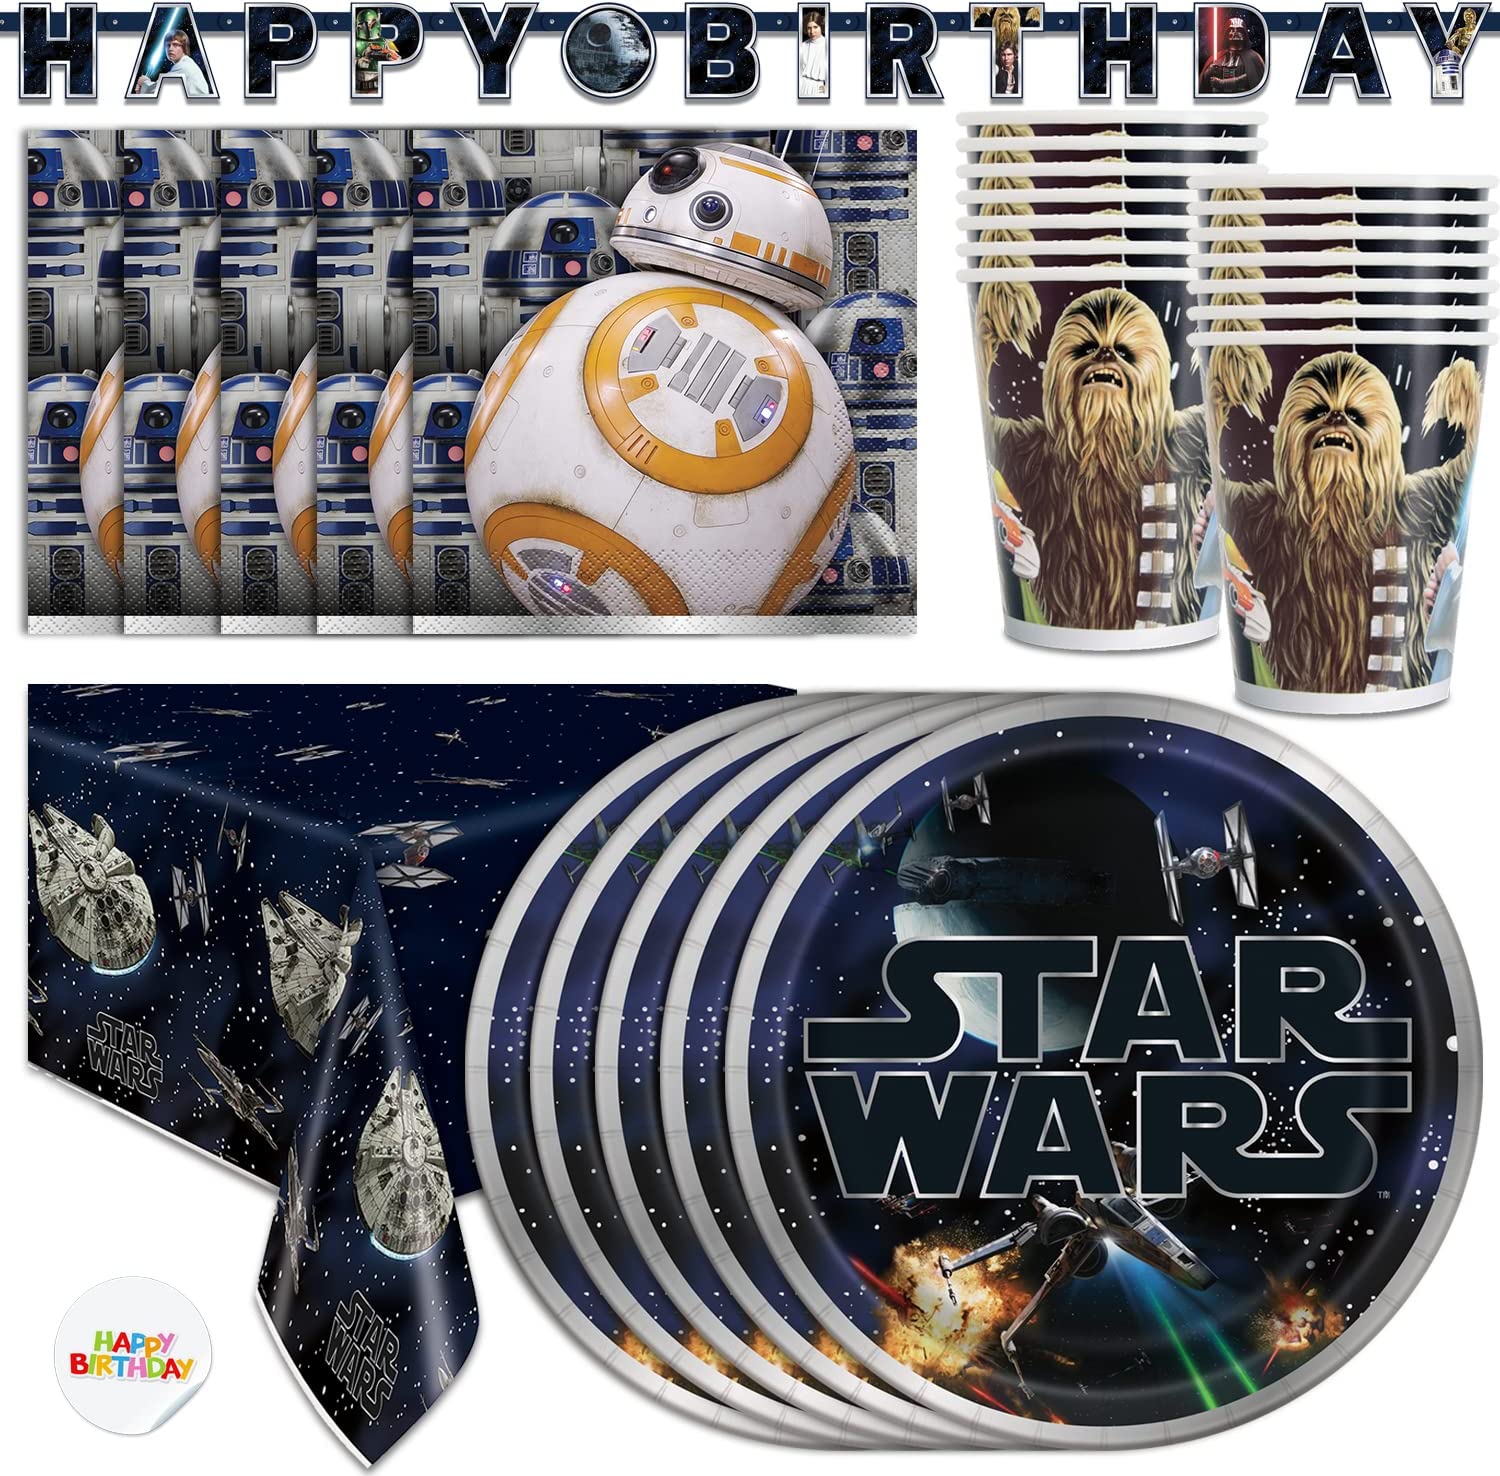 Star Wars Themed Party - Birthday Party - Ideas - Inspiration - Party Supplies - Party Decorations - Tableware